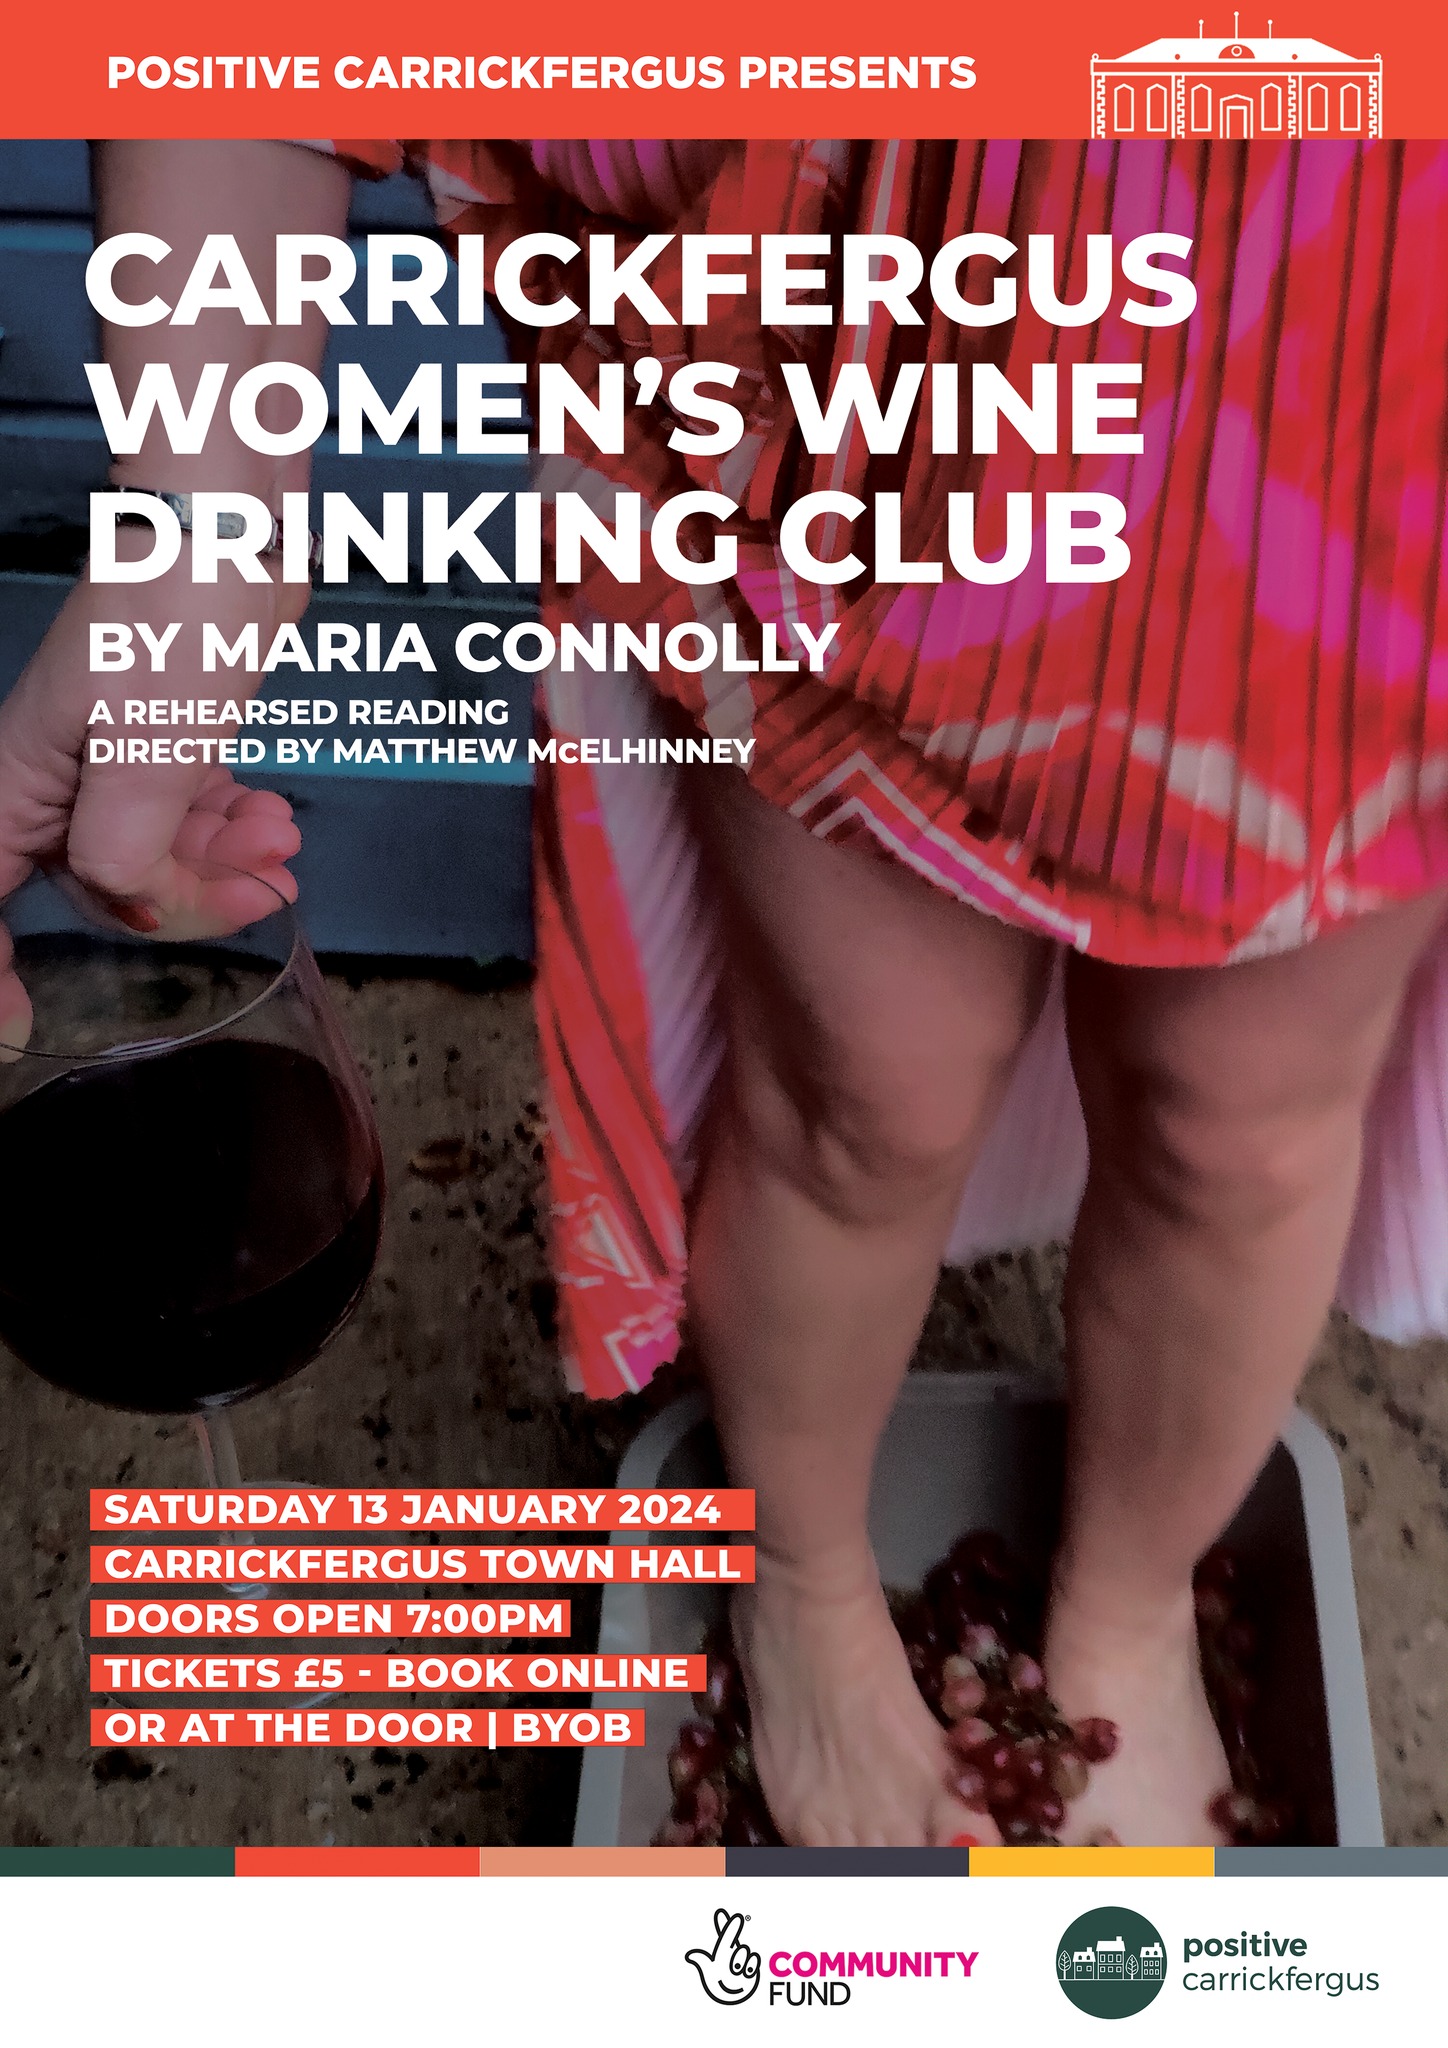 A woman is holding up her red skirt and standing in a washing up tub of grapes in her bare feet. The information about the event is written on the poster